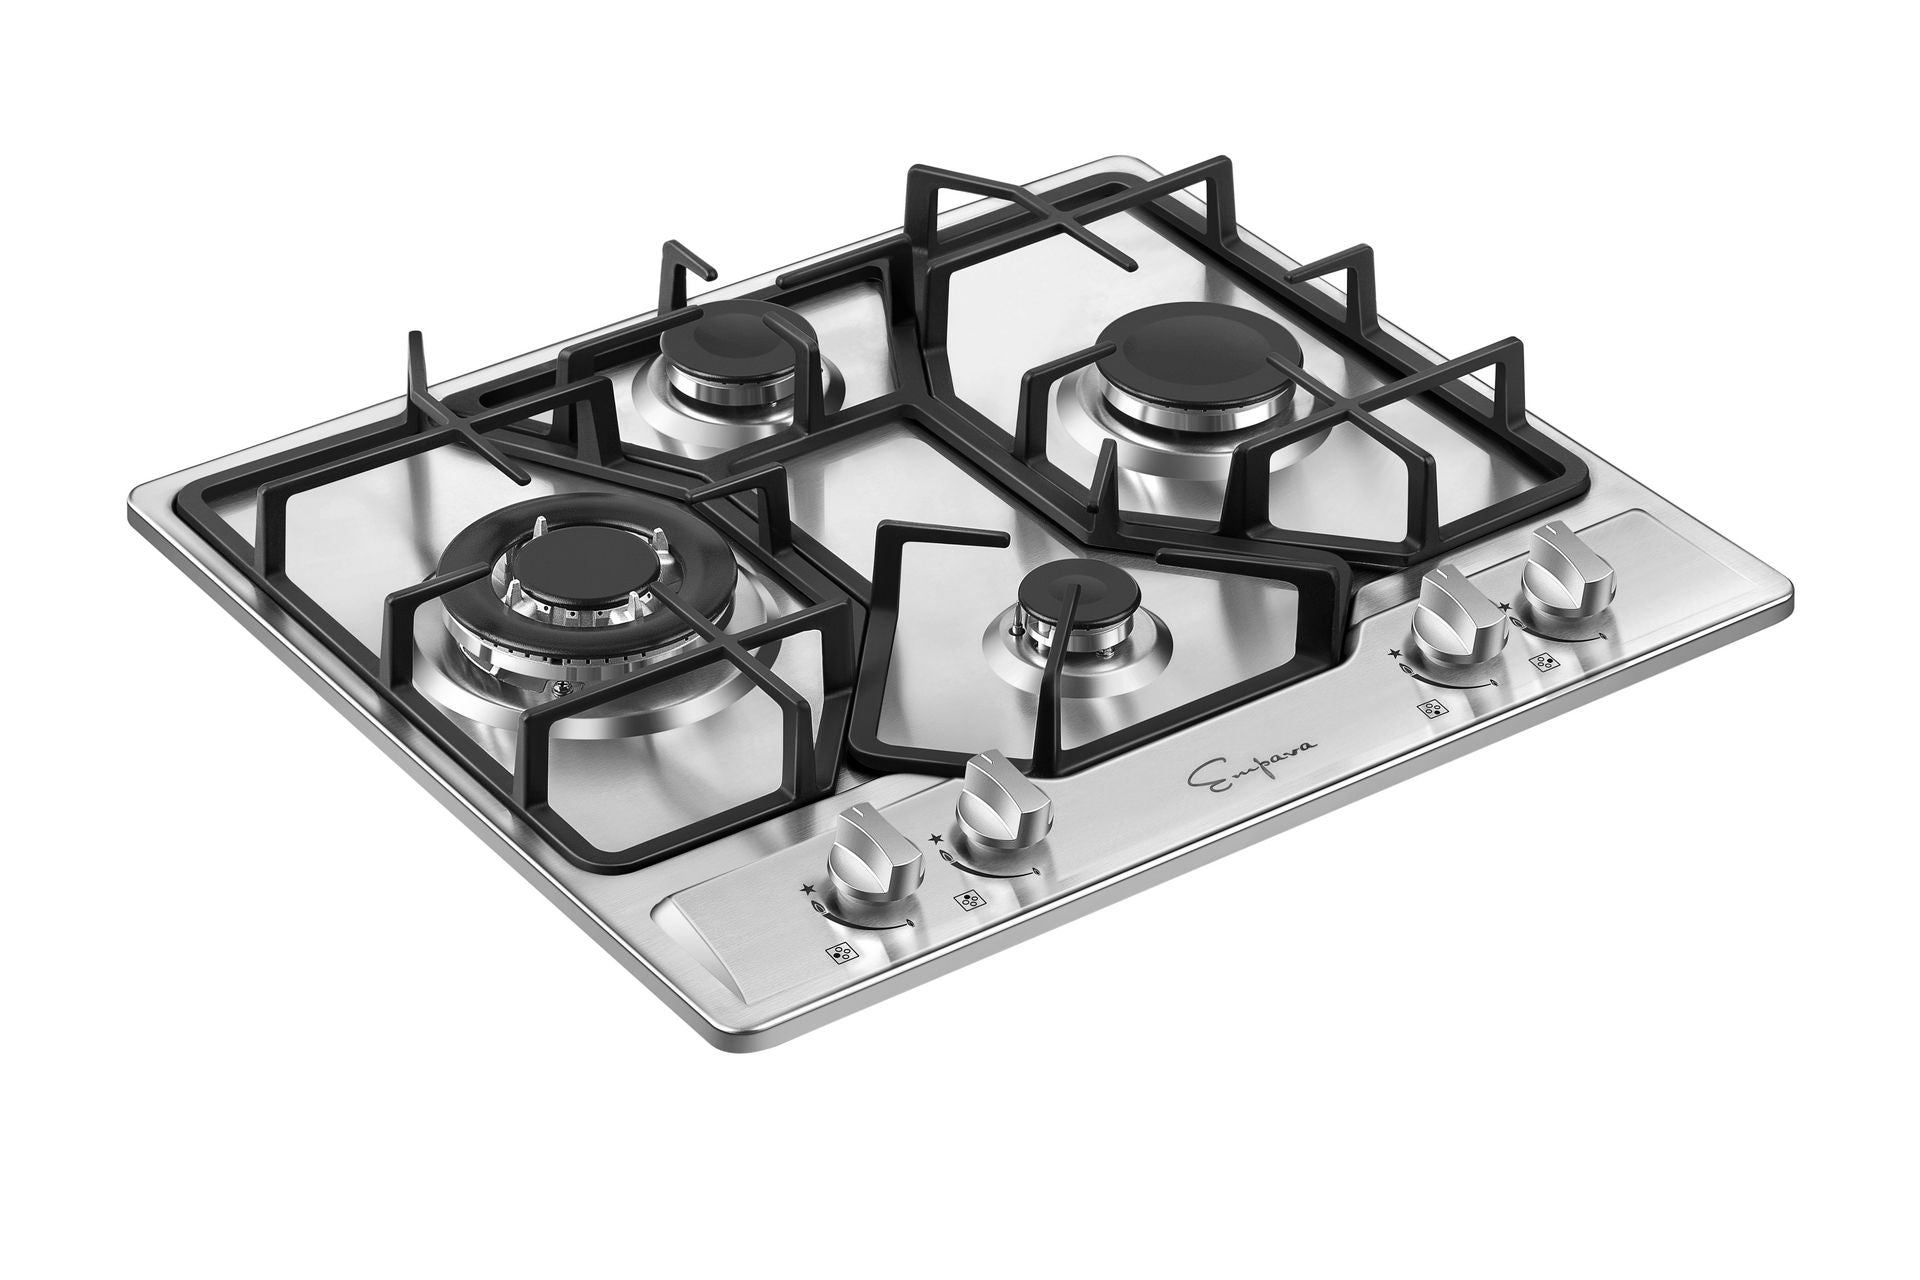 Empava 24 in. 4 burner Built-in Gas Cooktop in Stainless Steel (24GC4B67A)